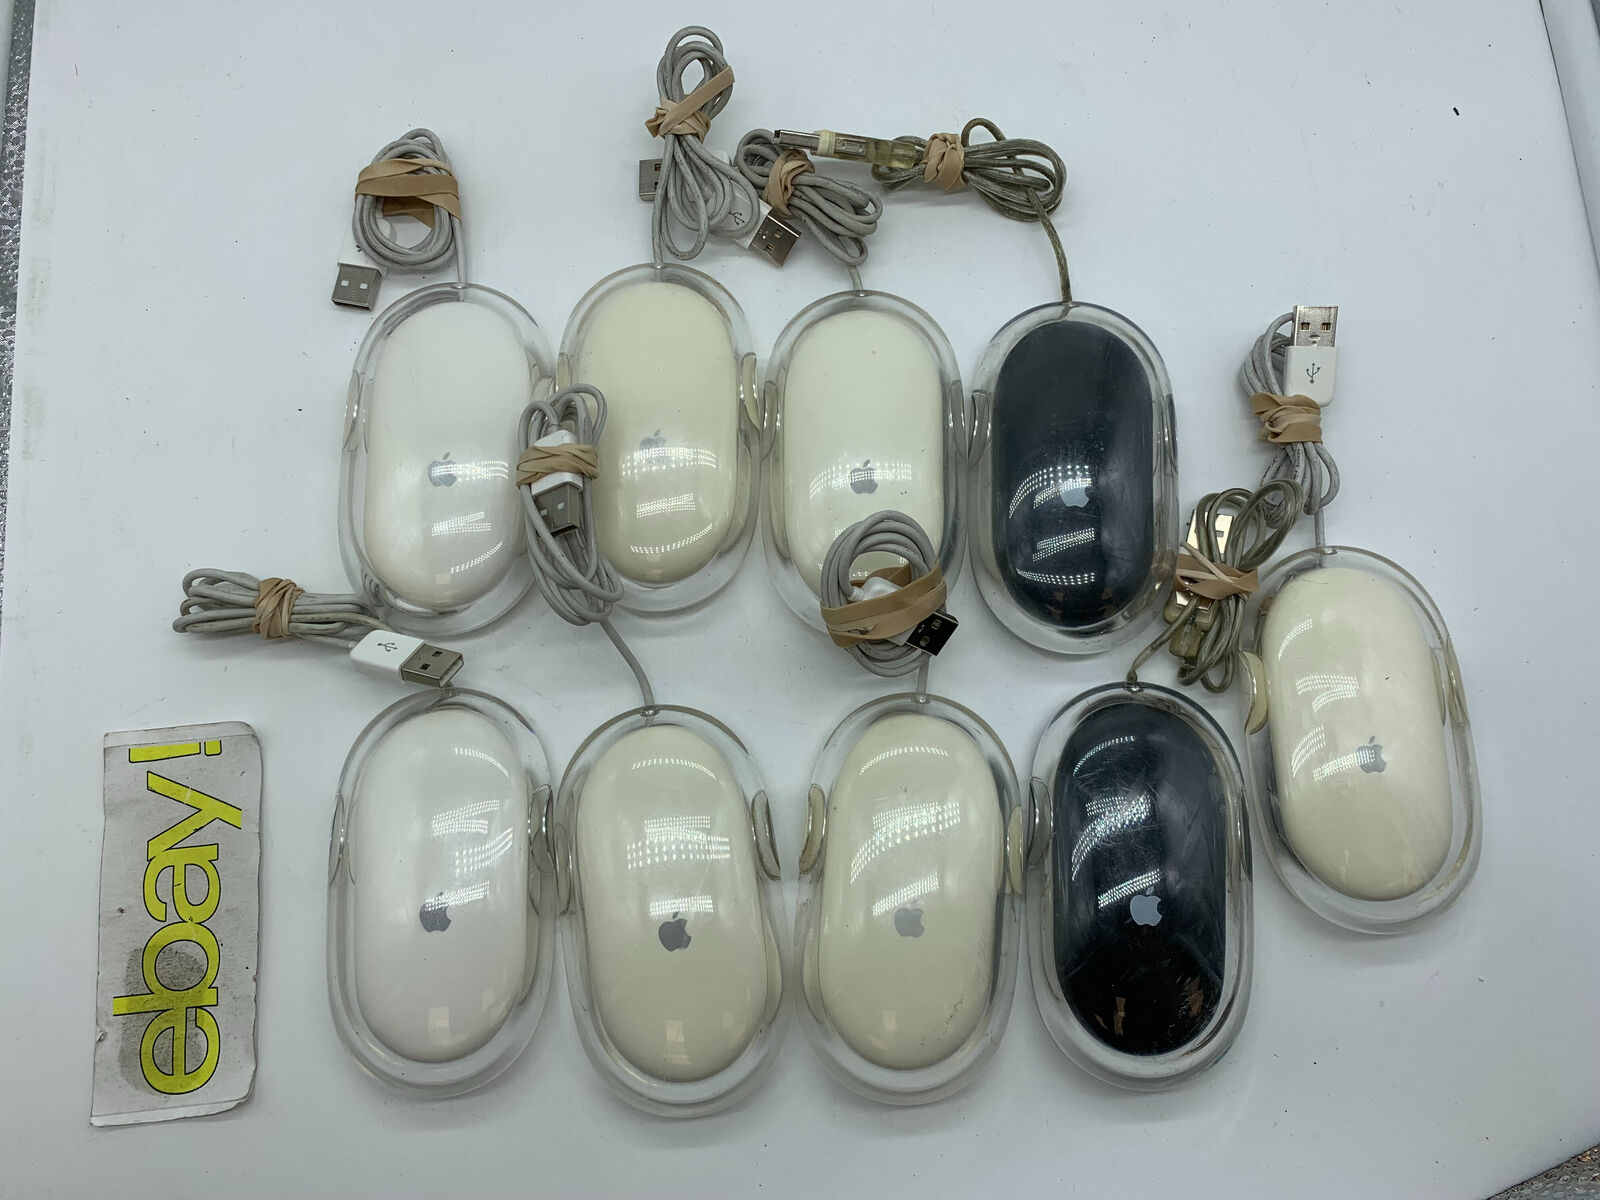 LOT OF 9 Vintage Apple Pro Mouse M5769 Wired USB 